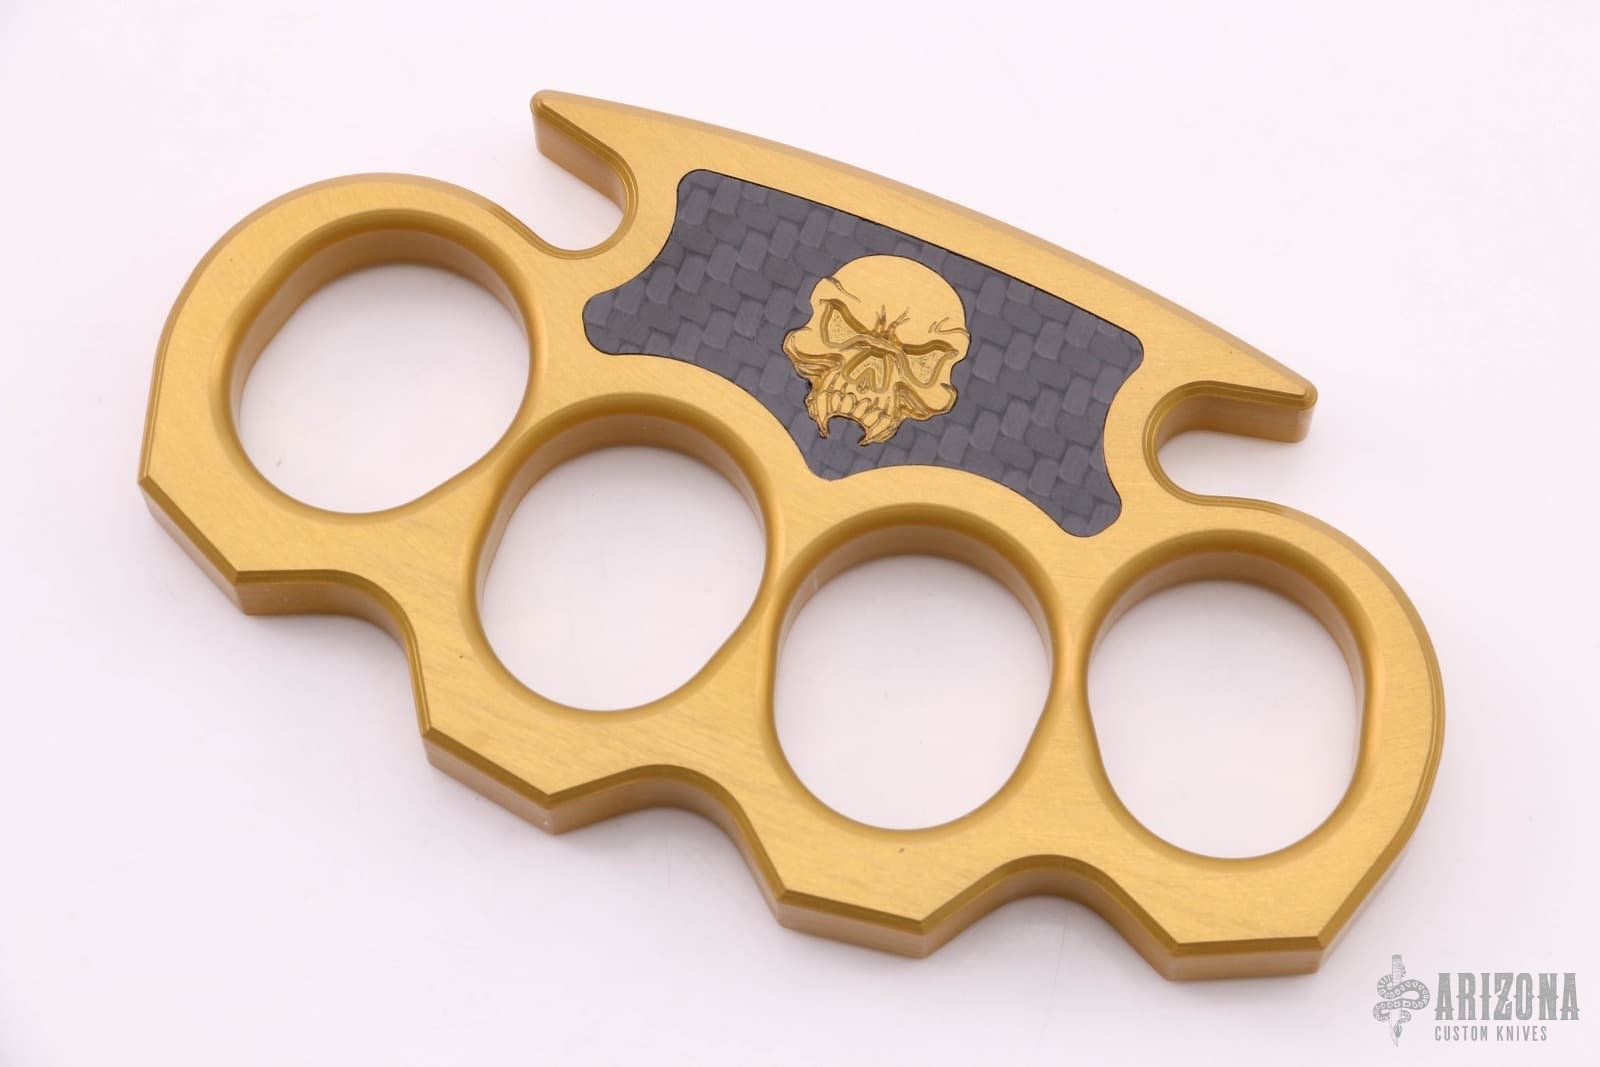 Bill would outlaw brass knuckles in Arizona